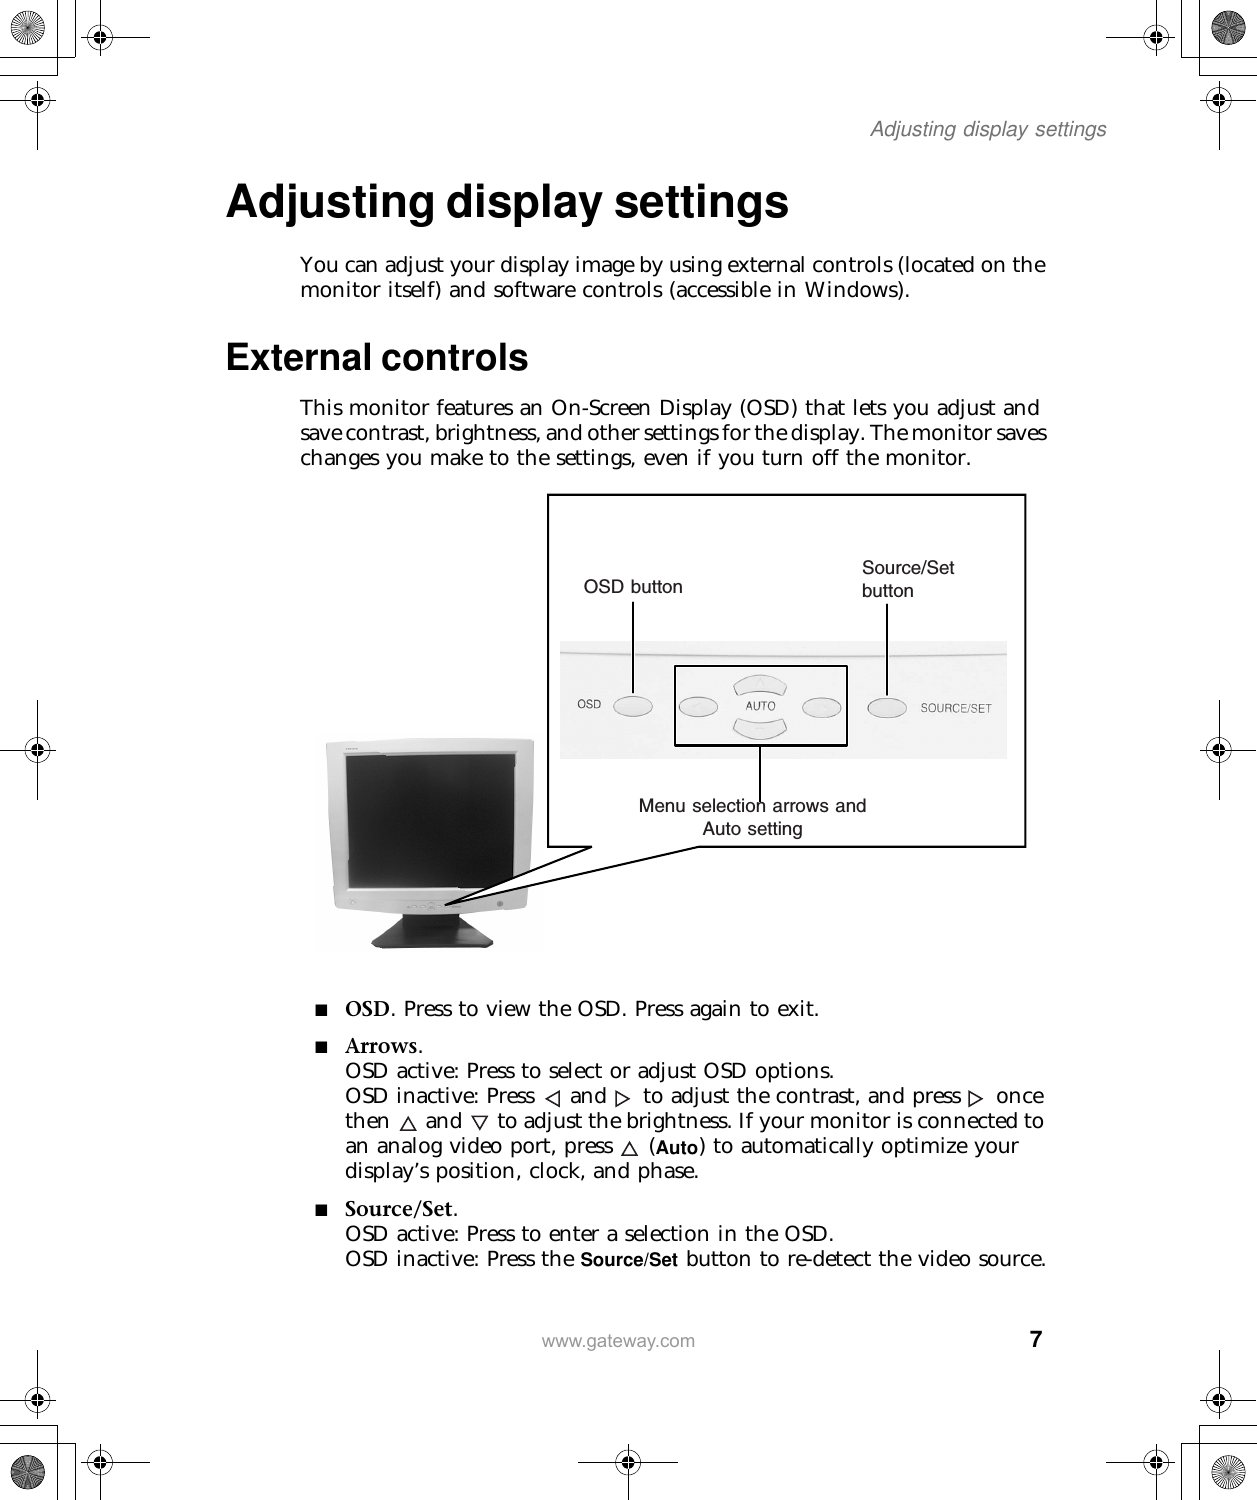   7Adjusting display settingswww.gateway.comAdjusting display settingsYou can adjust your display image by using external controls (located on the monitor itself) and software controls (accessible in Windows).External controlsThis monitor features an On-Screen Display (OSD) that lets you adjust and save contrast, brightness, and other settings for the display. The monitor saves changes you make to the settings, even if you turn off the monitor.■OSD. Press to view the OSD. Press again to exit.■Arrows.OSD active: Press to select or adjust OSD options.OSD inactive: Press  and  to adjust the contrast, and press  once then  and  to adjust the brightness. If your monitor is connected to an analog video port, press  (Auto) to automatically optimize your display’s position, clock, and phase.■Source/Set.OSD active: Press to enter a selection in the OSD.OSD inactive: Press the Source/Set button to re-detect the video source.Menu selection arrows and Auto settingOSD buttonSource/Set button